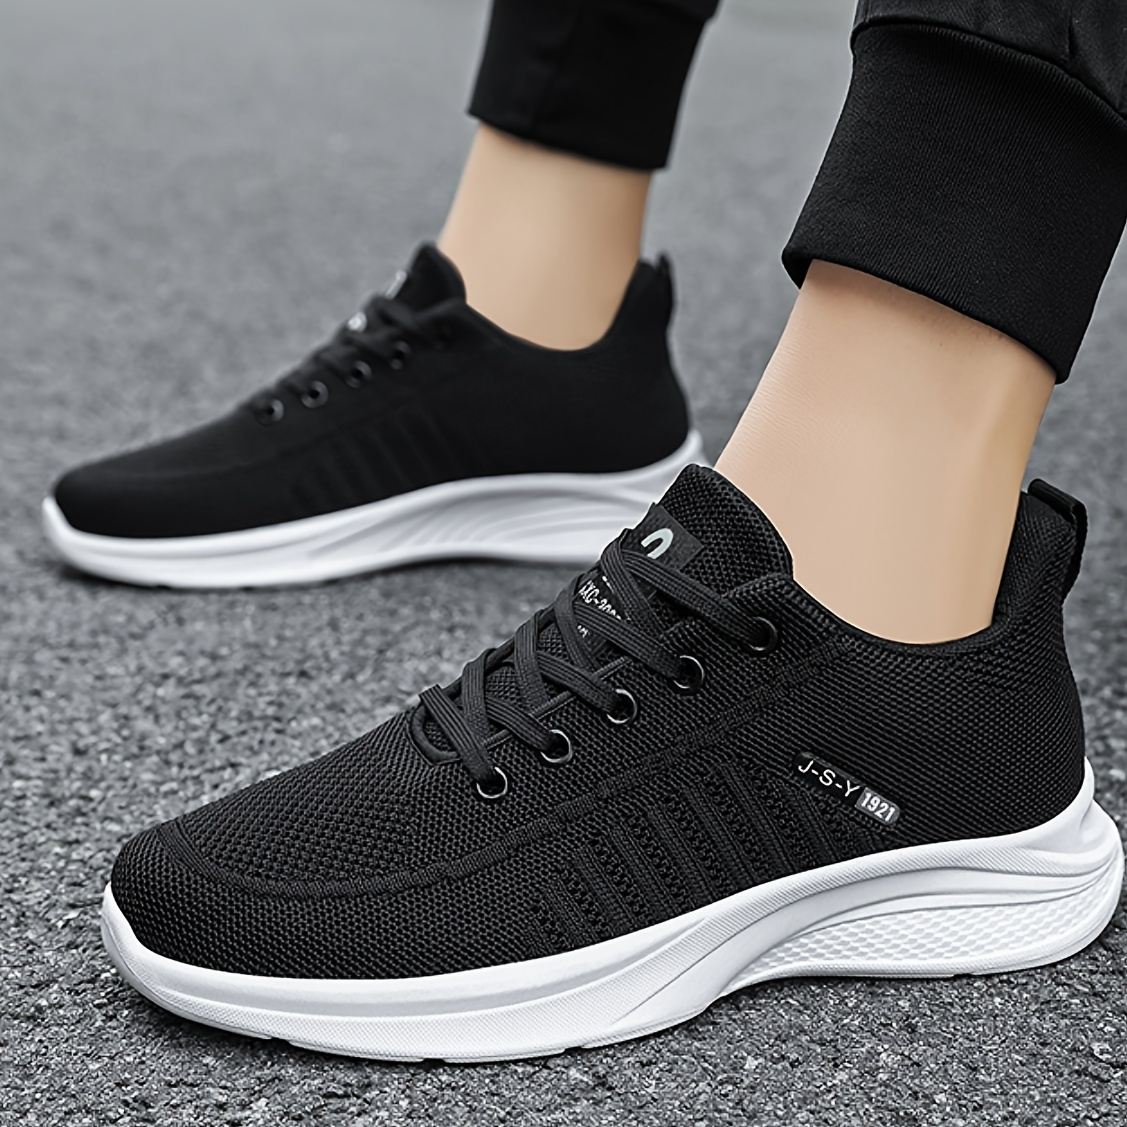 

Men's Trendy Woven Knit Breathable Running Shoes, Comfy Non Slip Durable Lace Up Sneakers For Men's Outdoor Activities